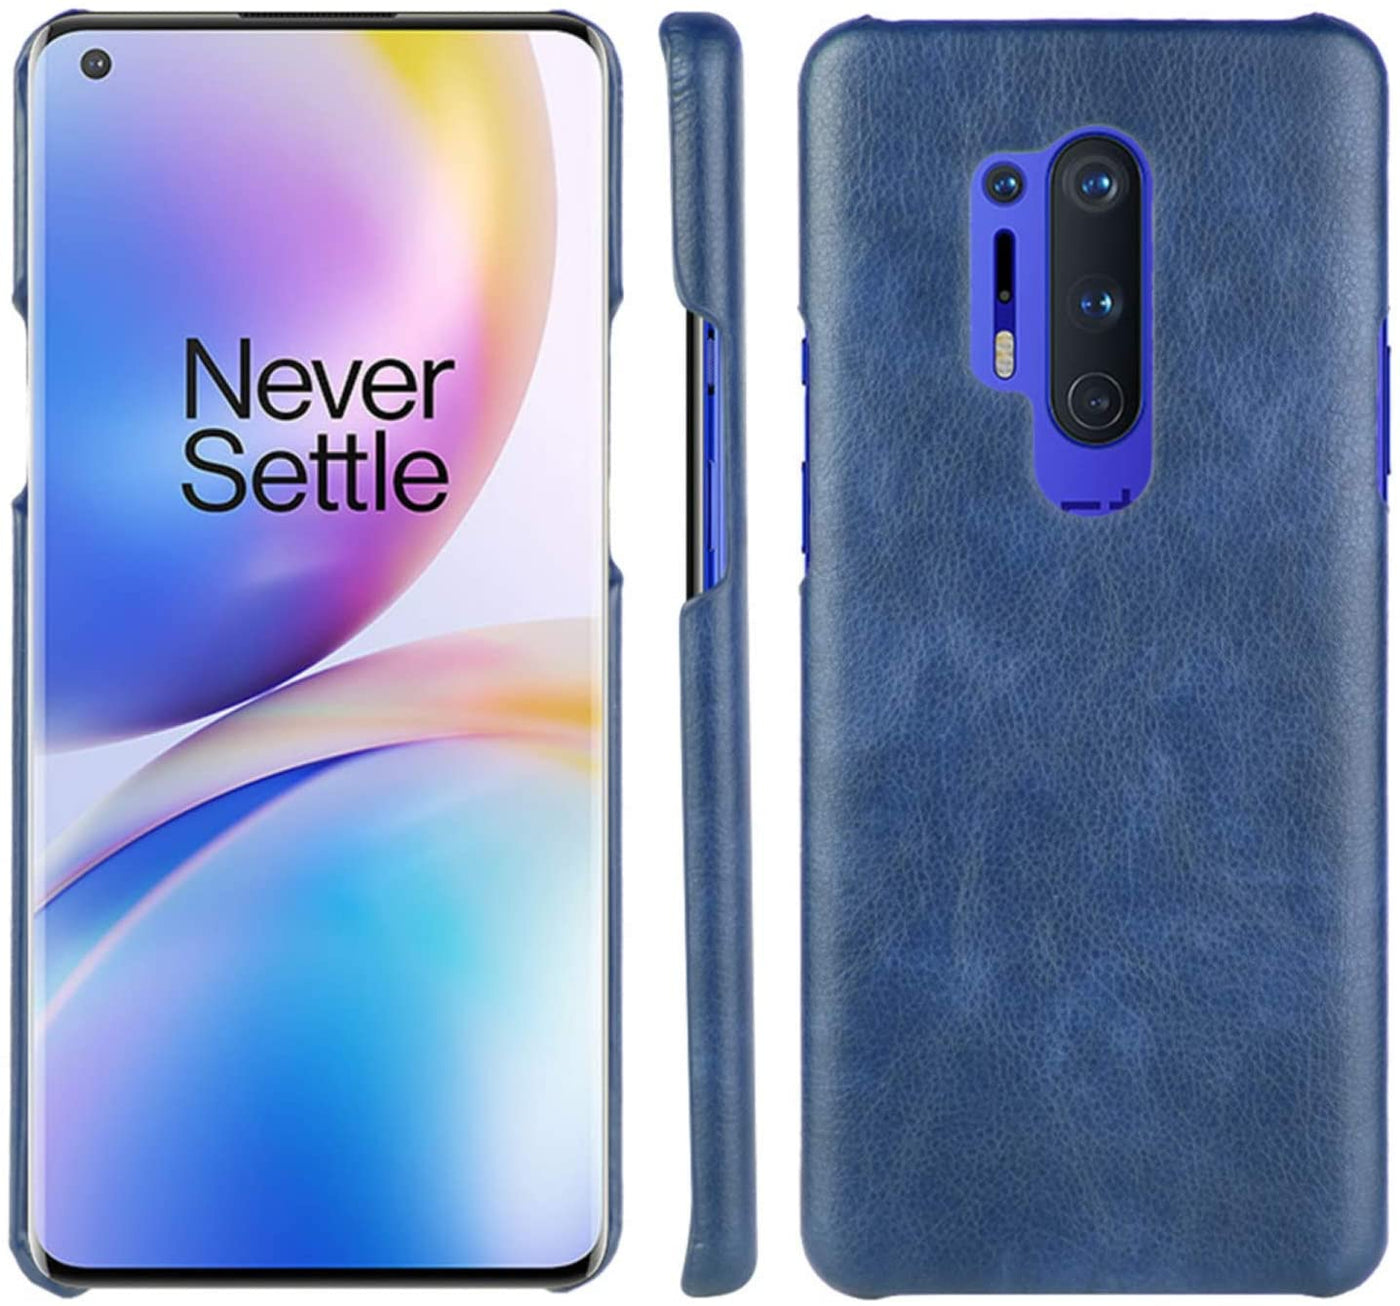 Excelsior Premium PU Leather Hard Back Cover case for Oneplus 8 Pro